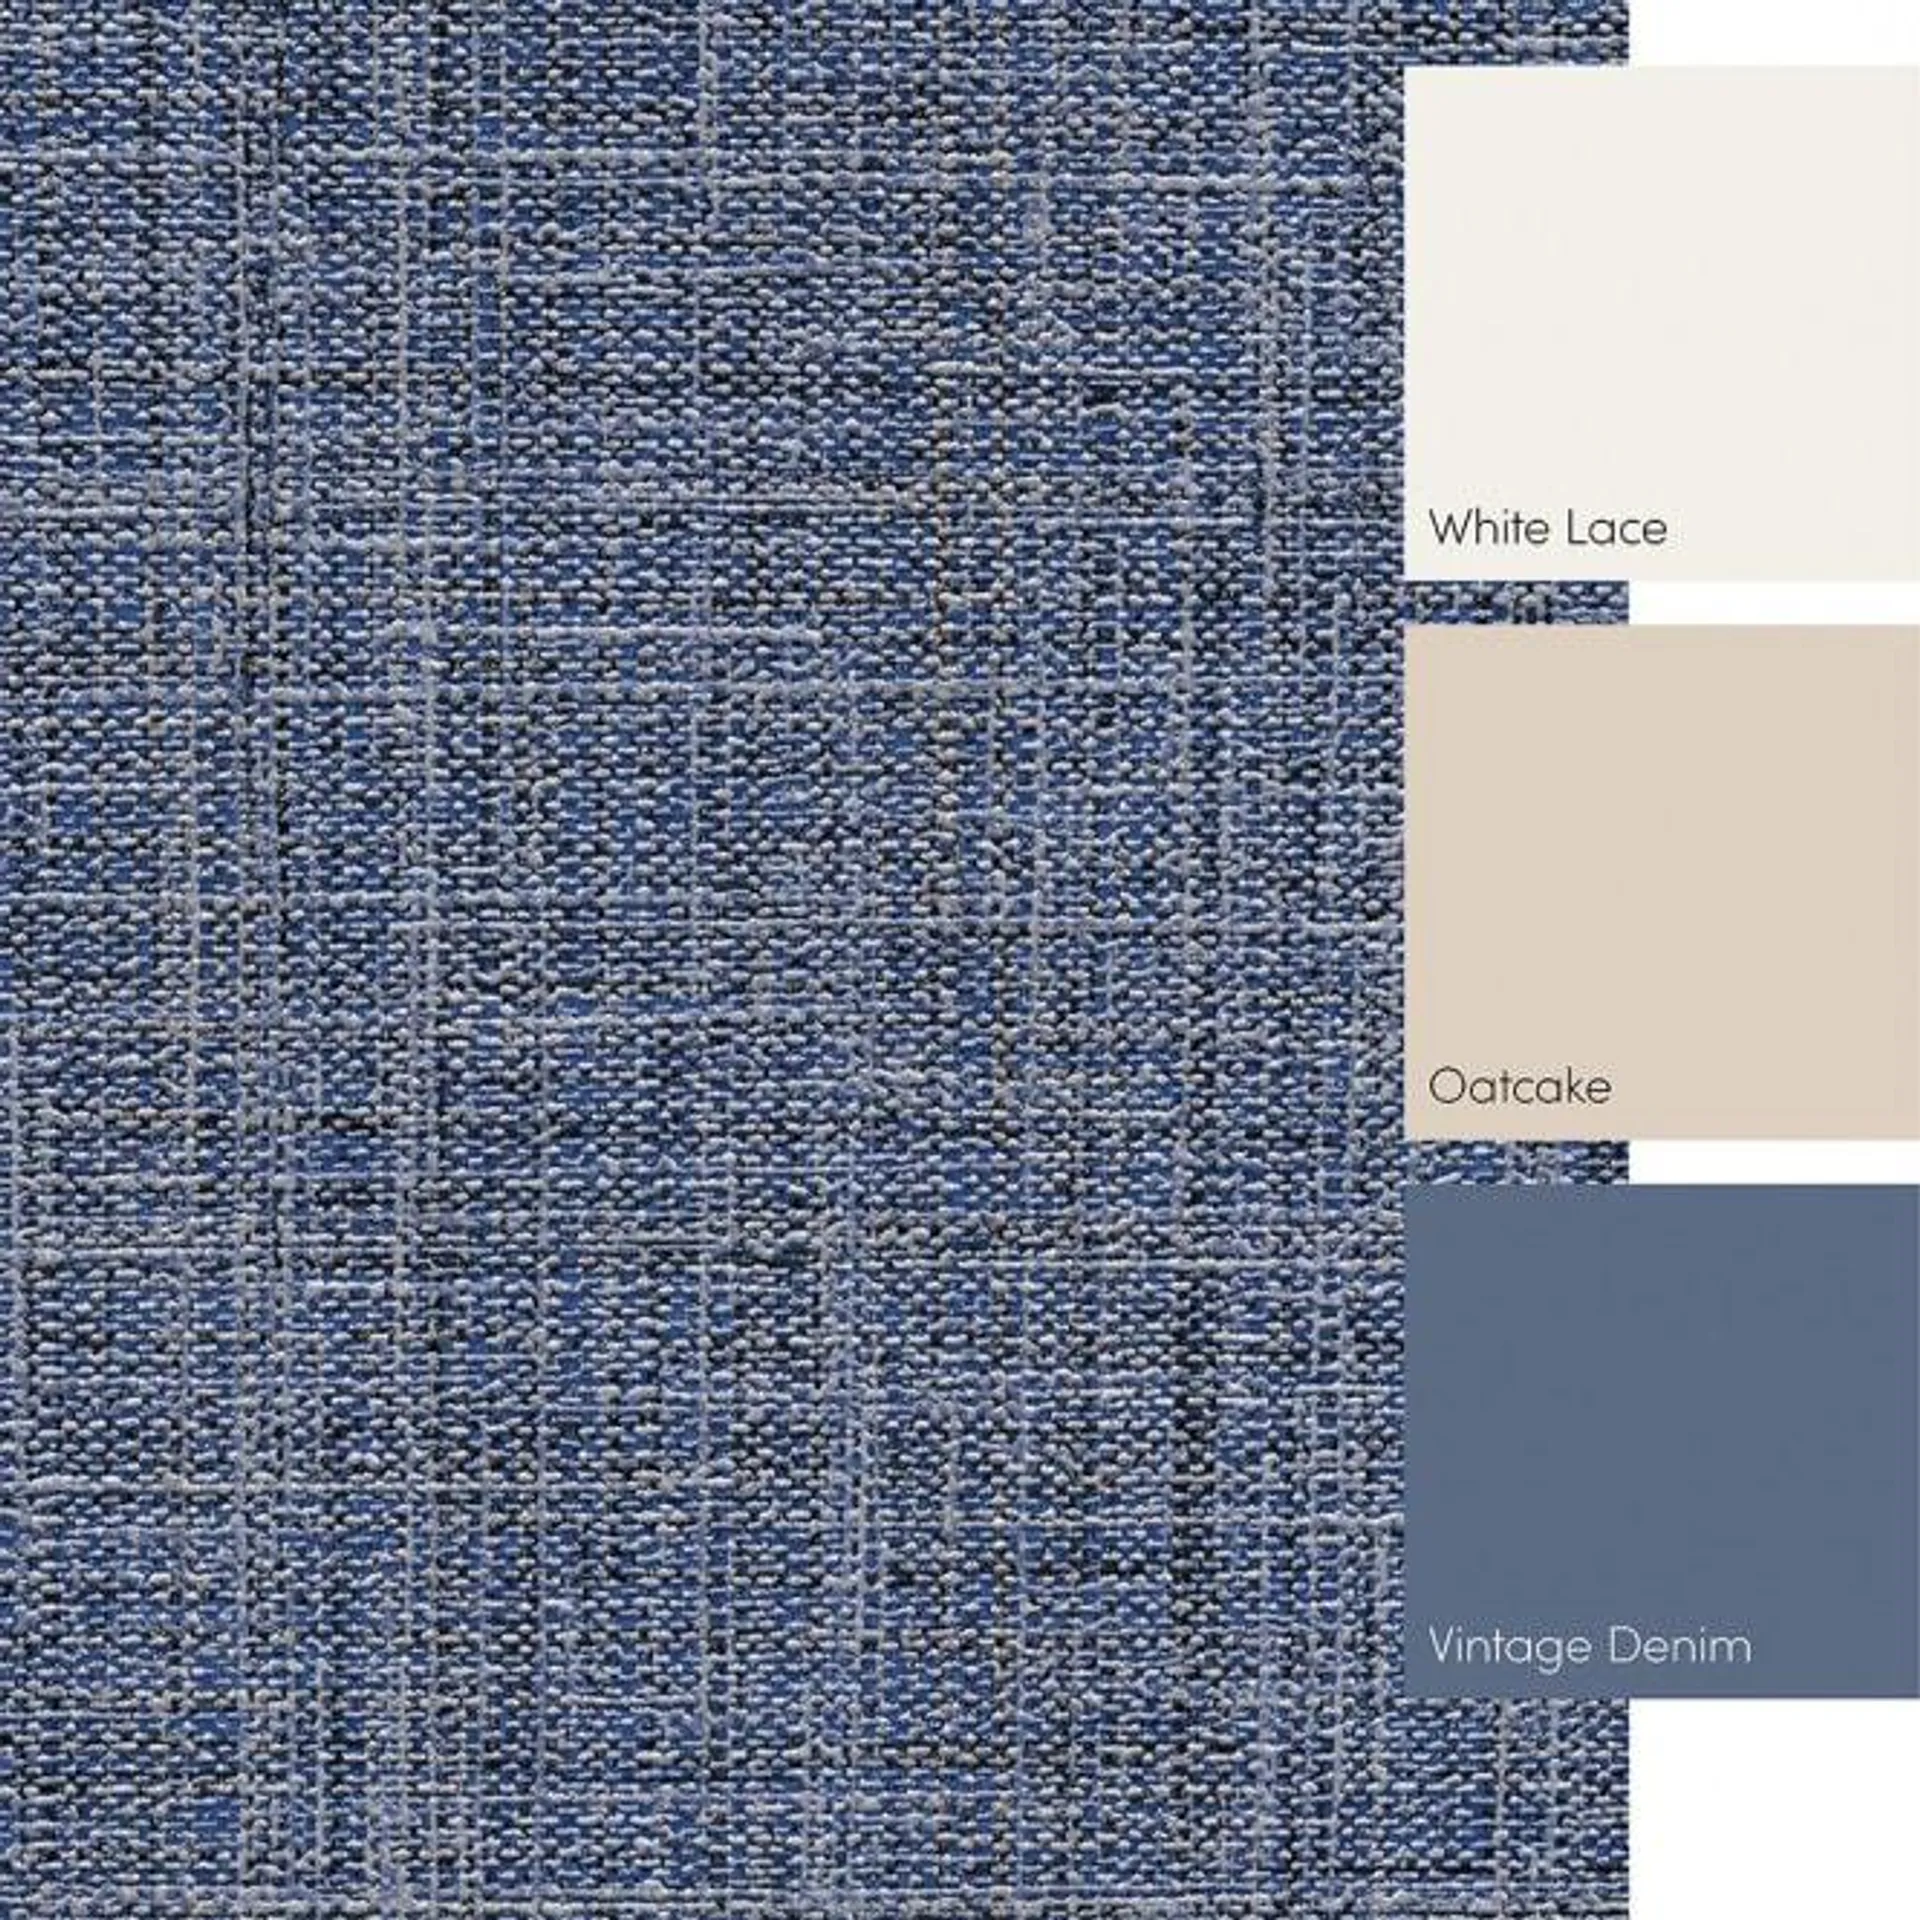 Calico Texture Fabric effect Wallpaper in Navy Blue and Gold